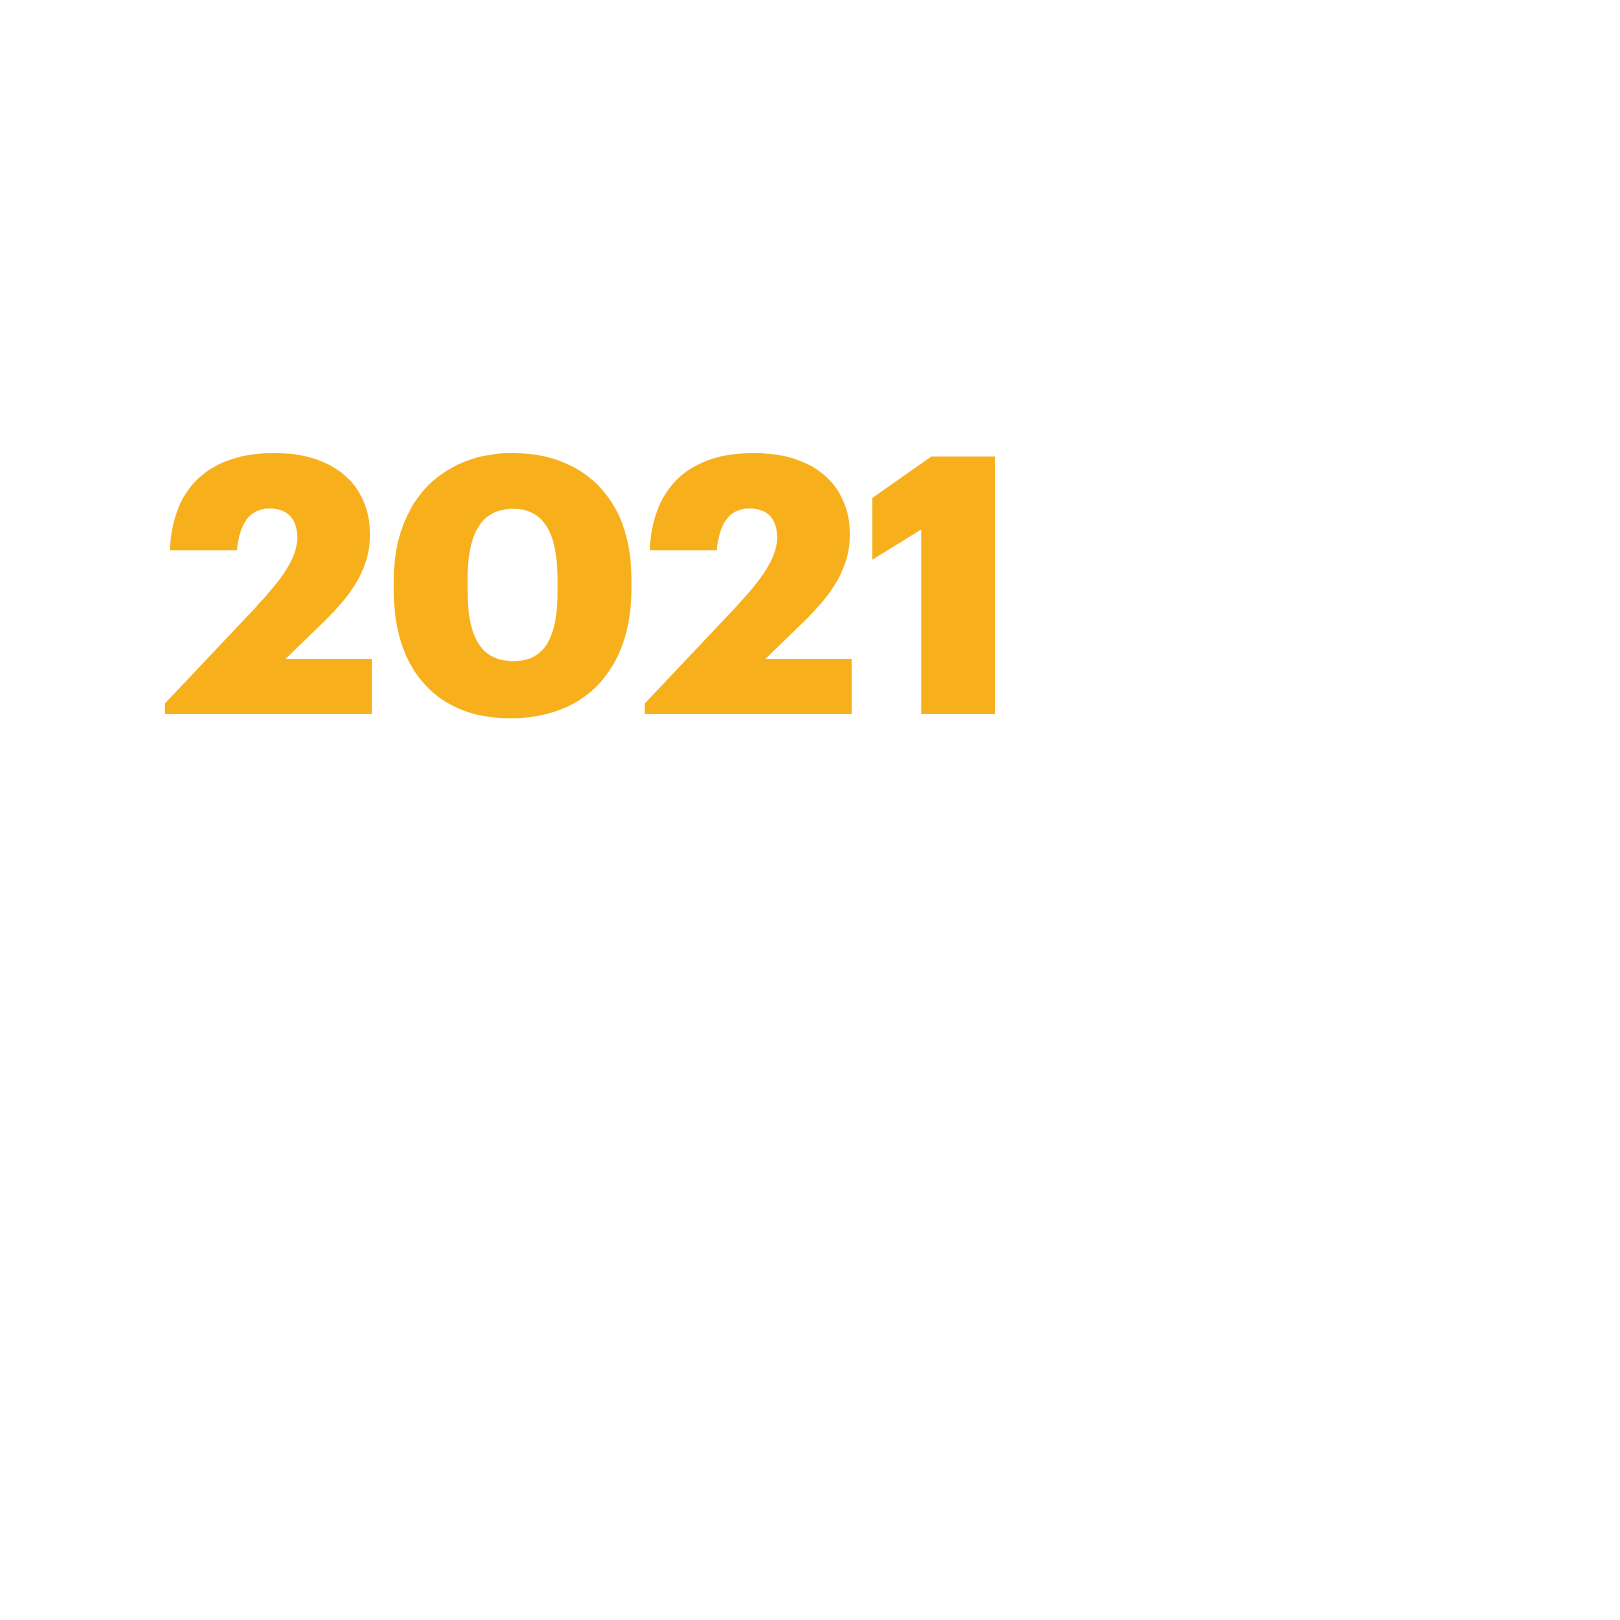 2021: Meeting Challenges with Resilience